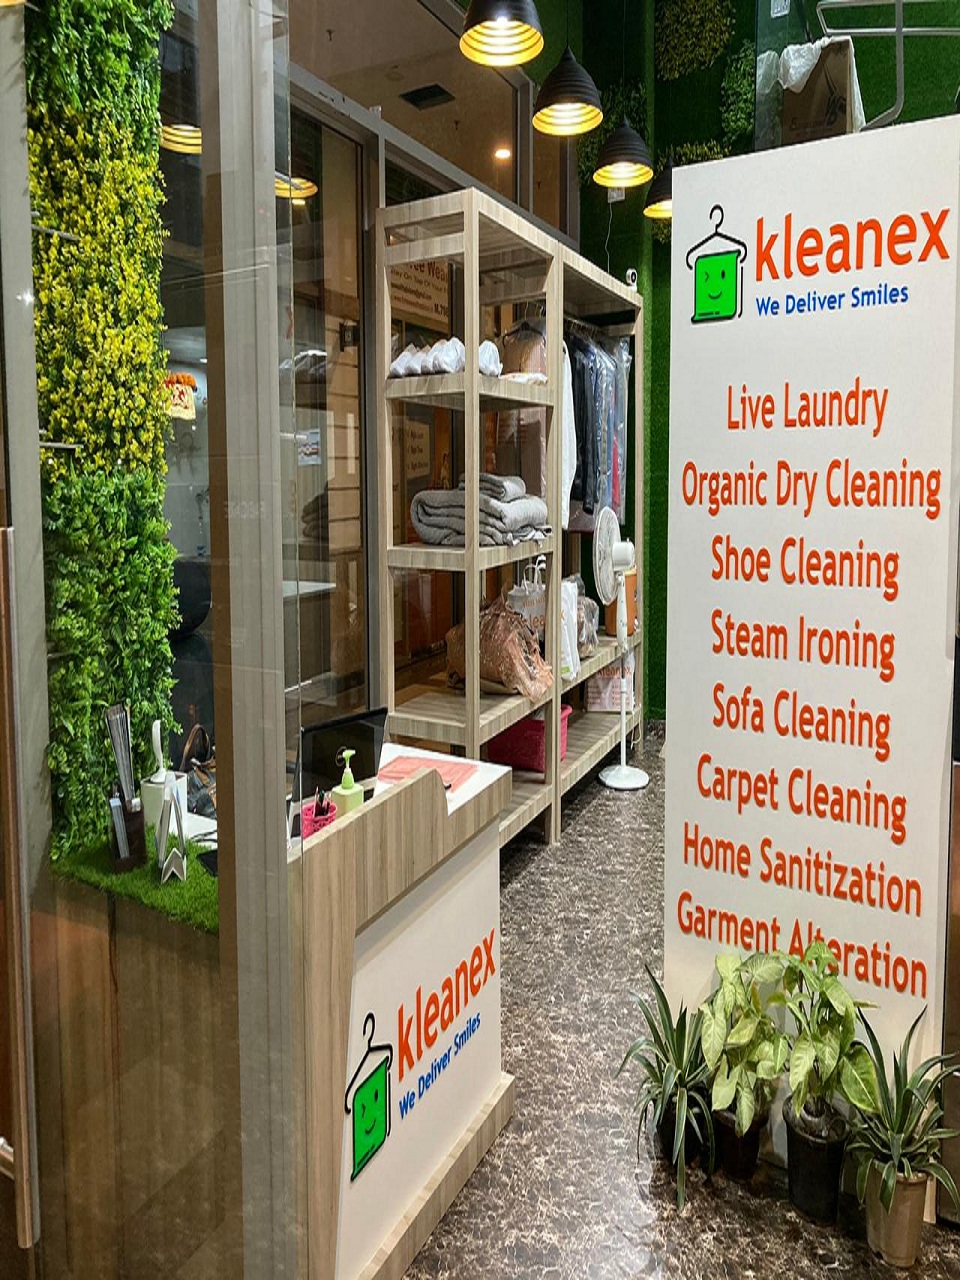 Best Dry Cleaning Service in Sector 67 Gurgaon | Sofa & Carpet Dry Cleaning Sector 67 Gurgaon | Dry Cleaners in Sector 67 Gurgaon | Kleanex Laundry & Dry Cleaning